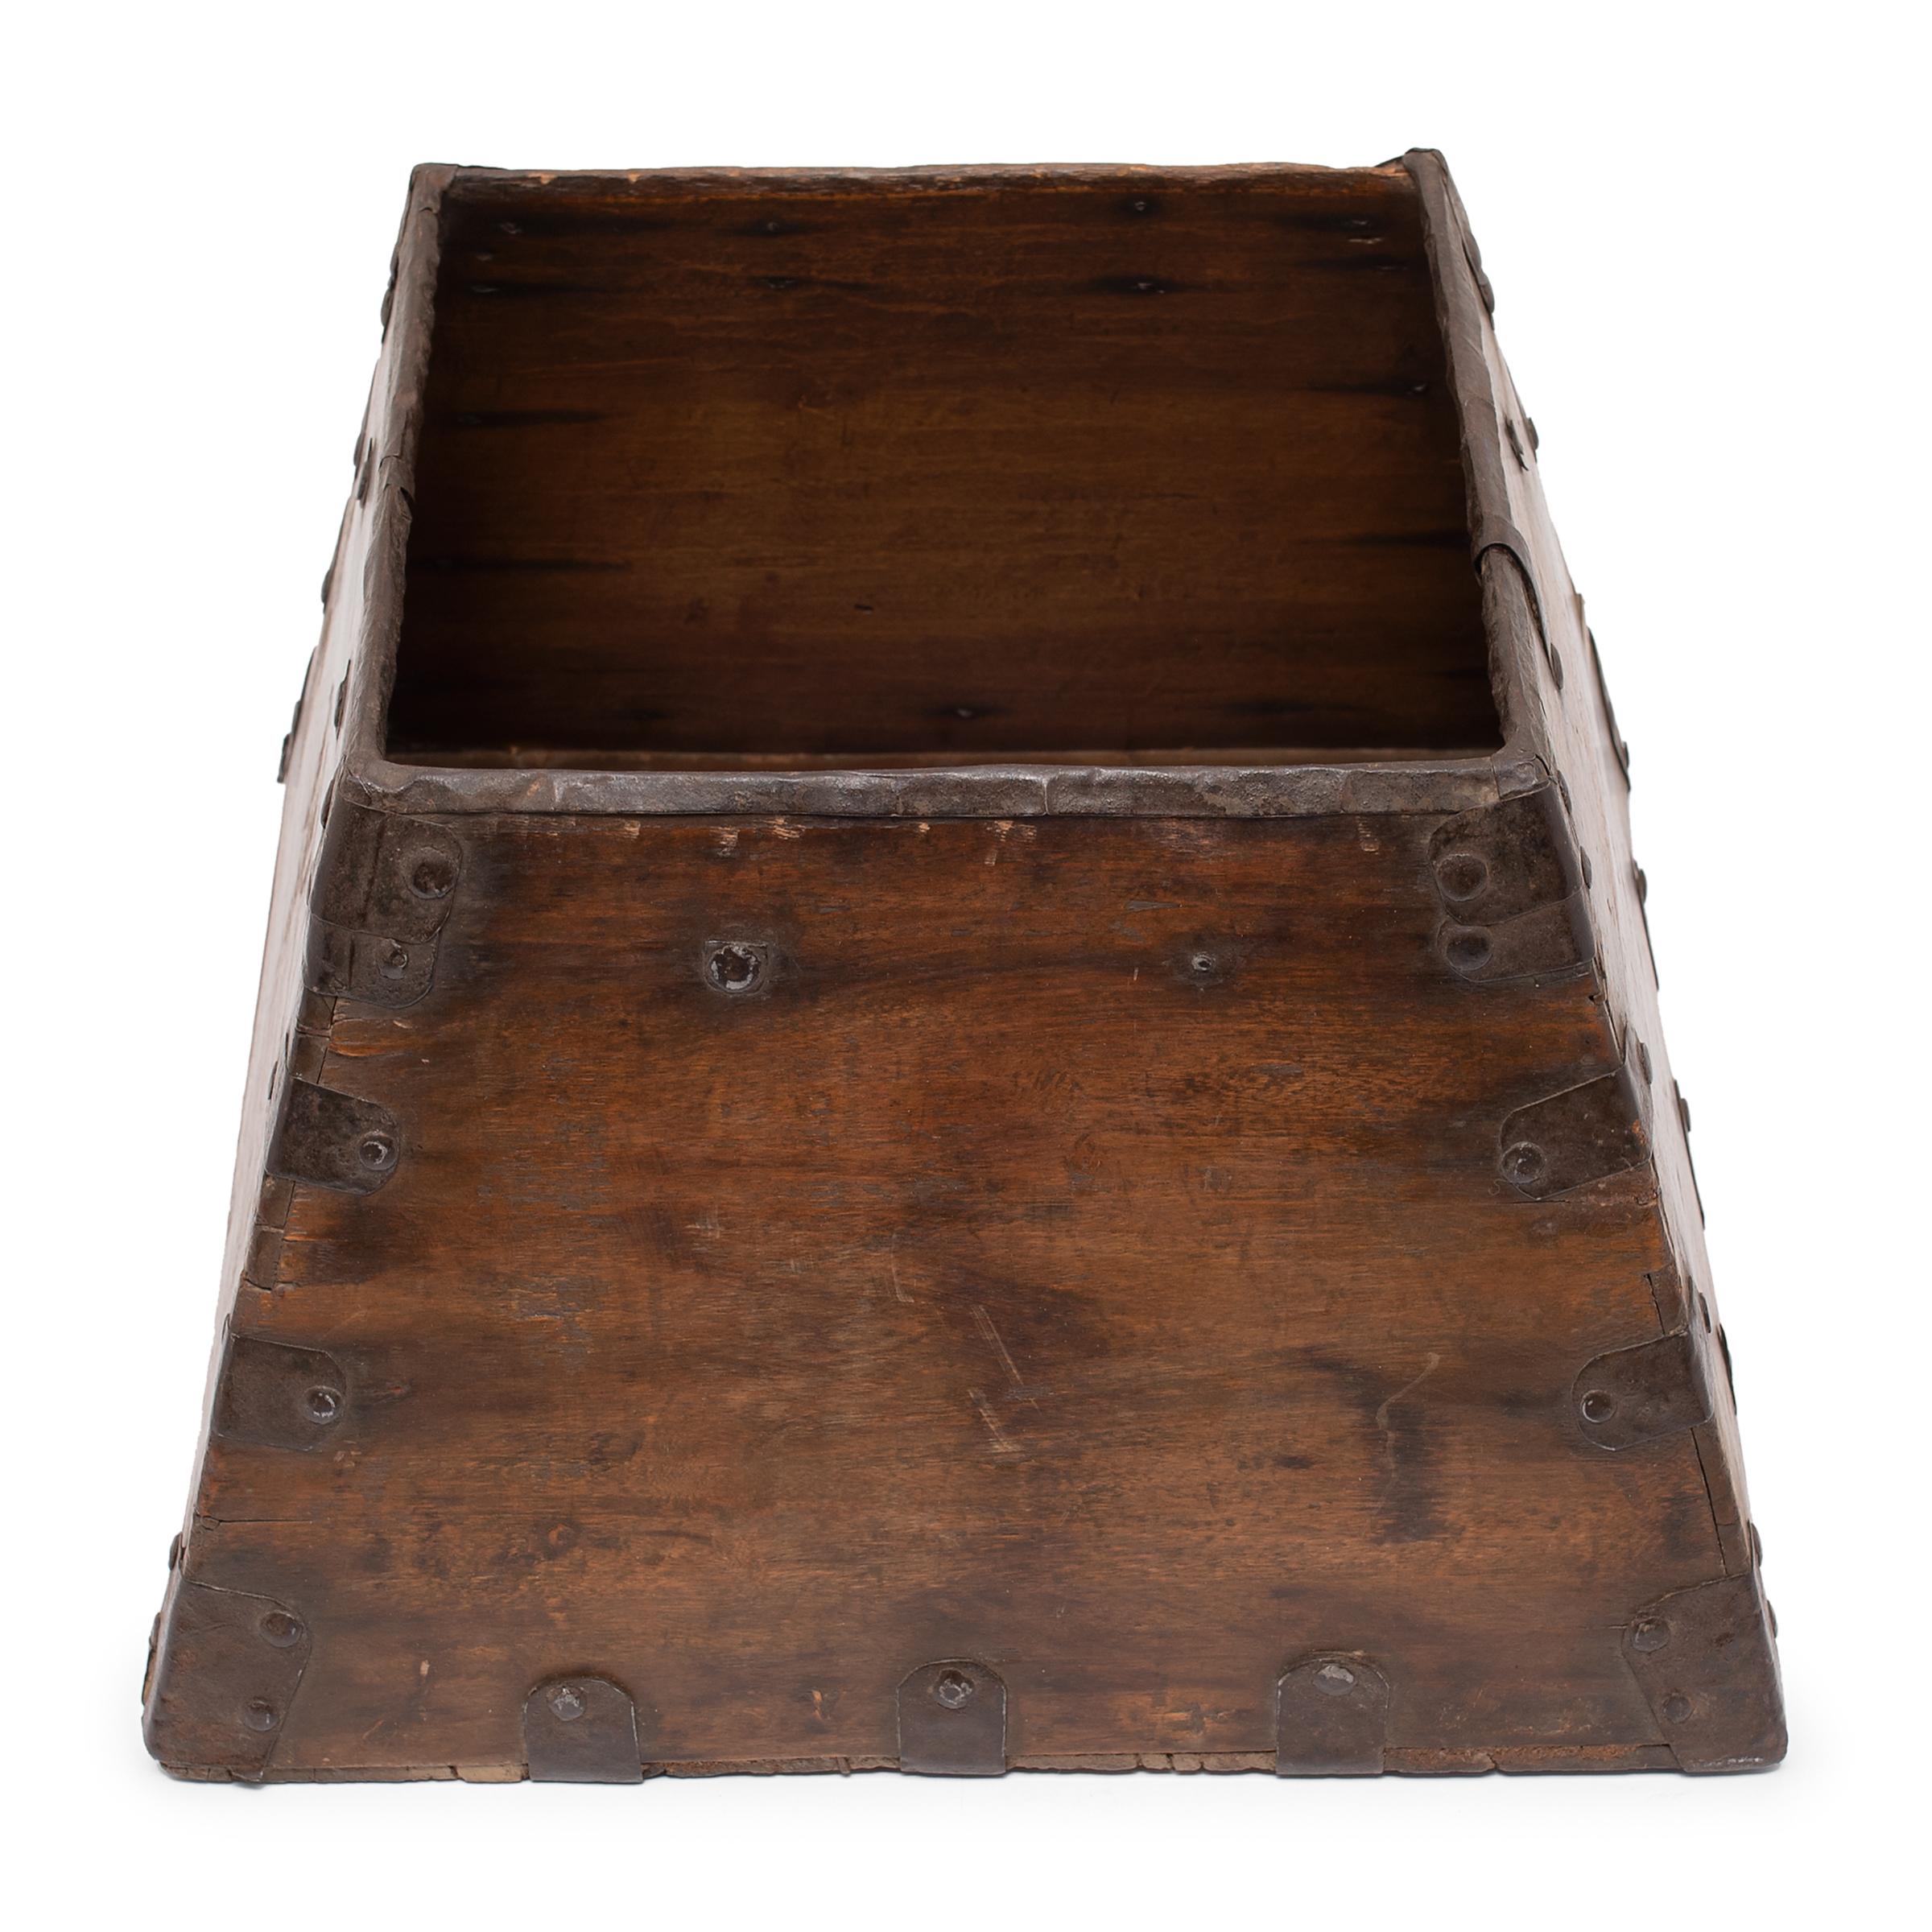 Rustic Provincial Chinese Rice Measure, c. 1850 For Sale